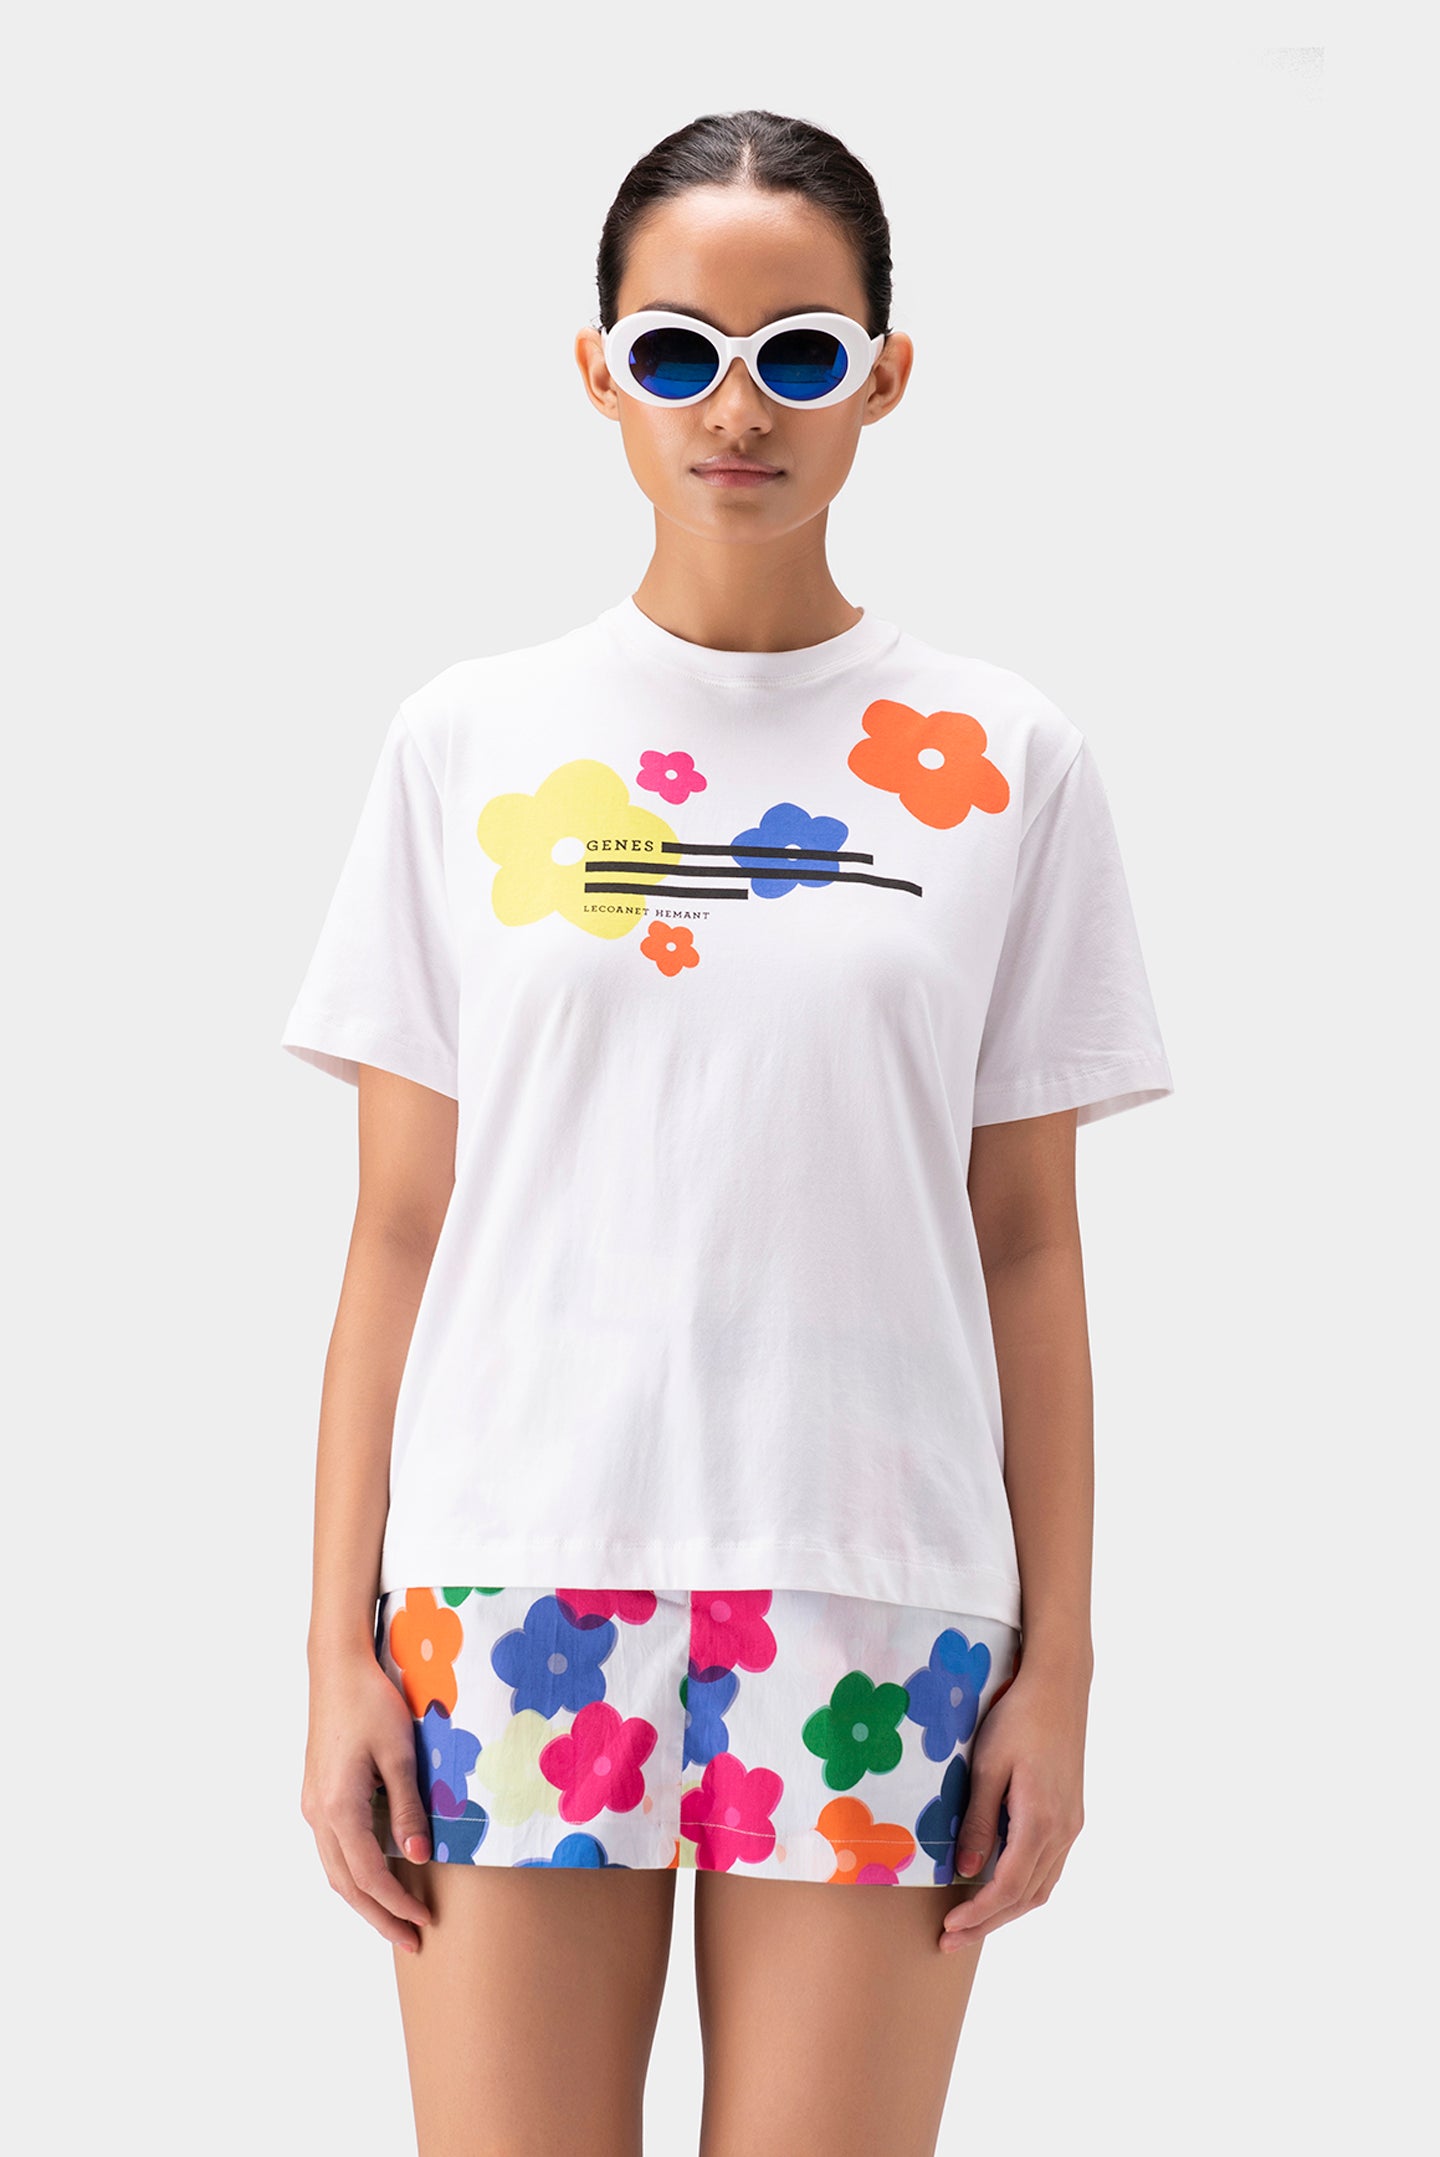 Multicolored Genes Florals Womens T-Shirt